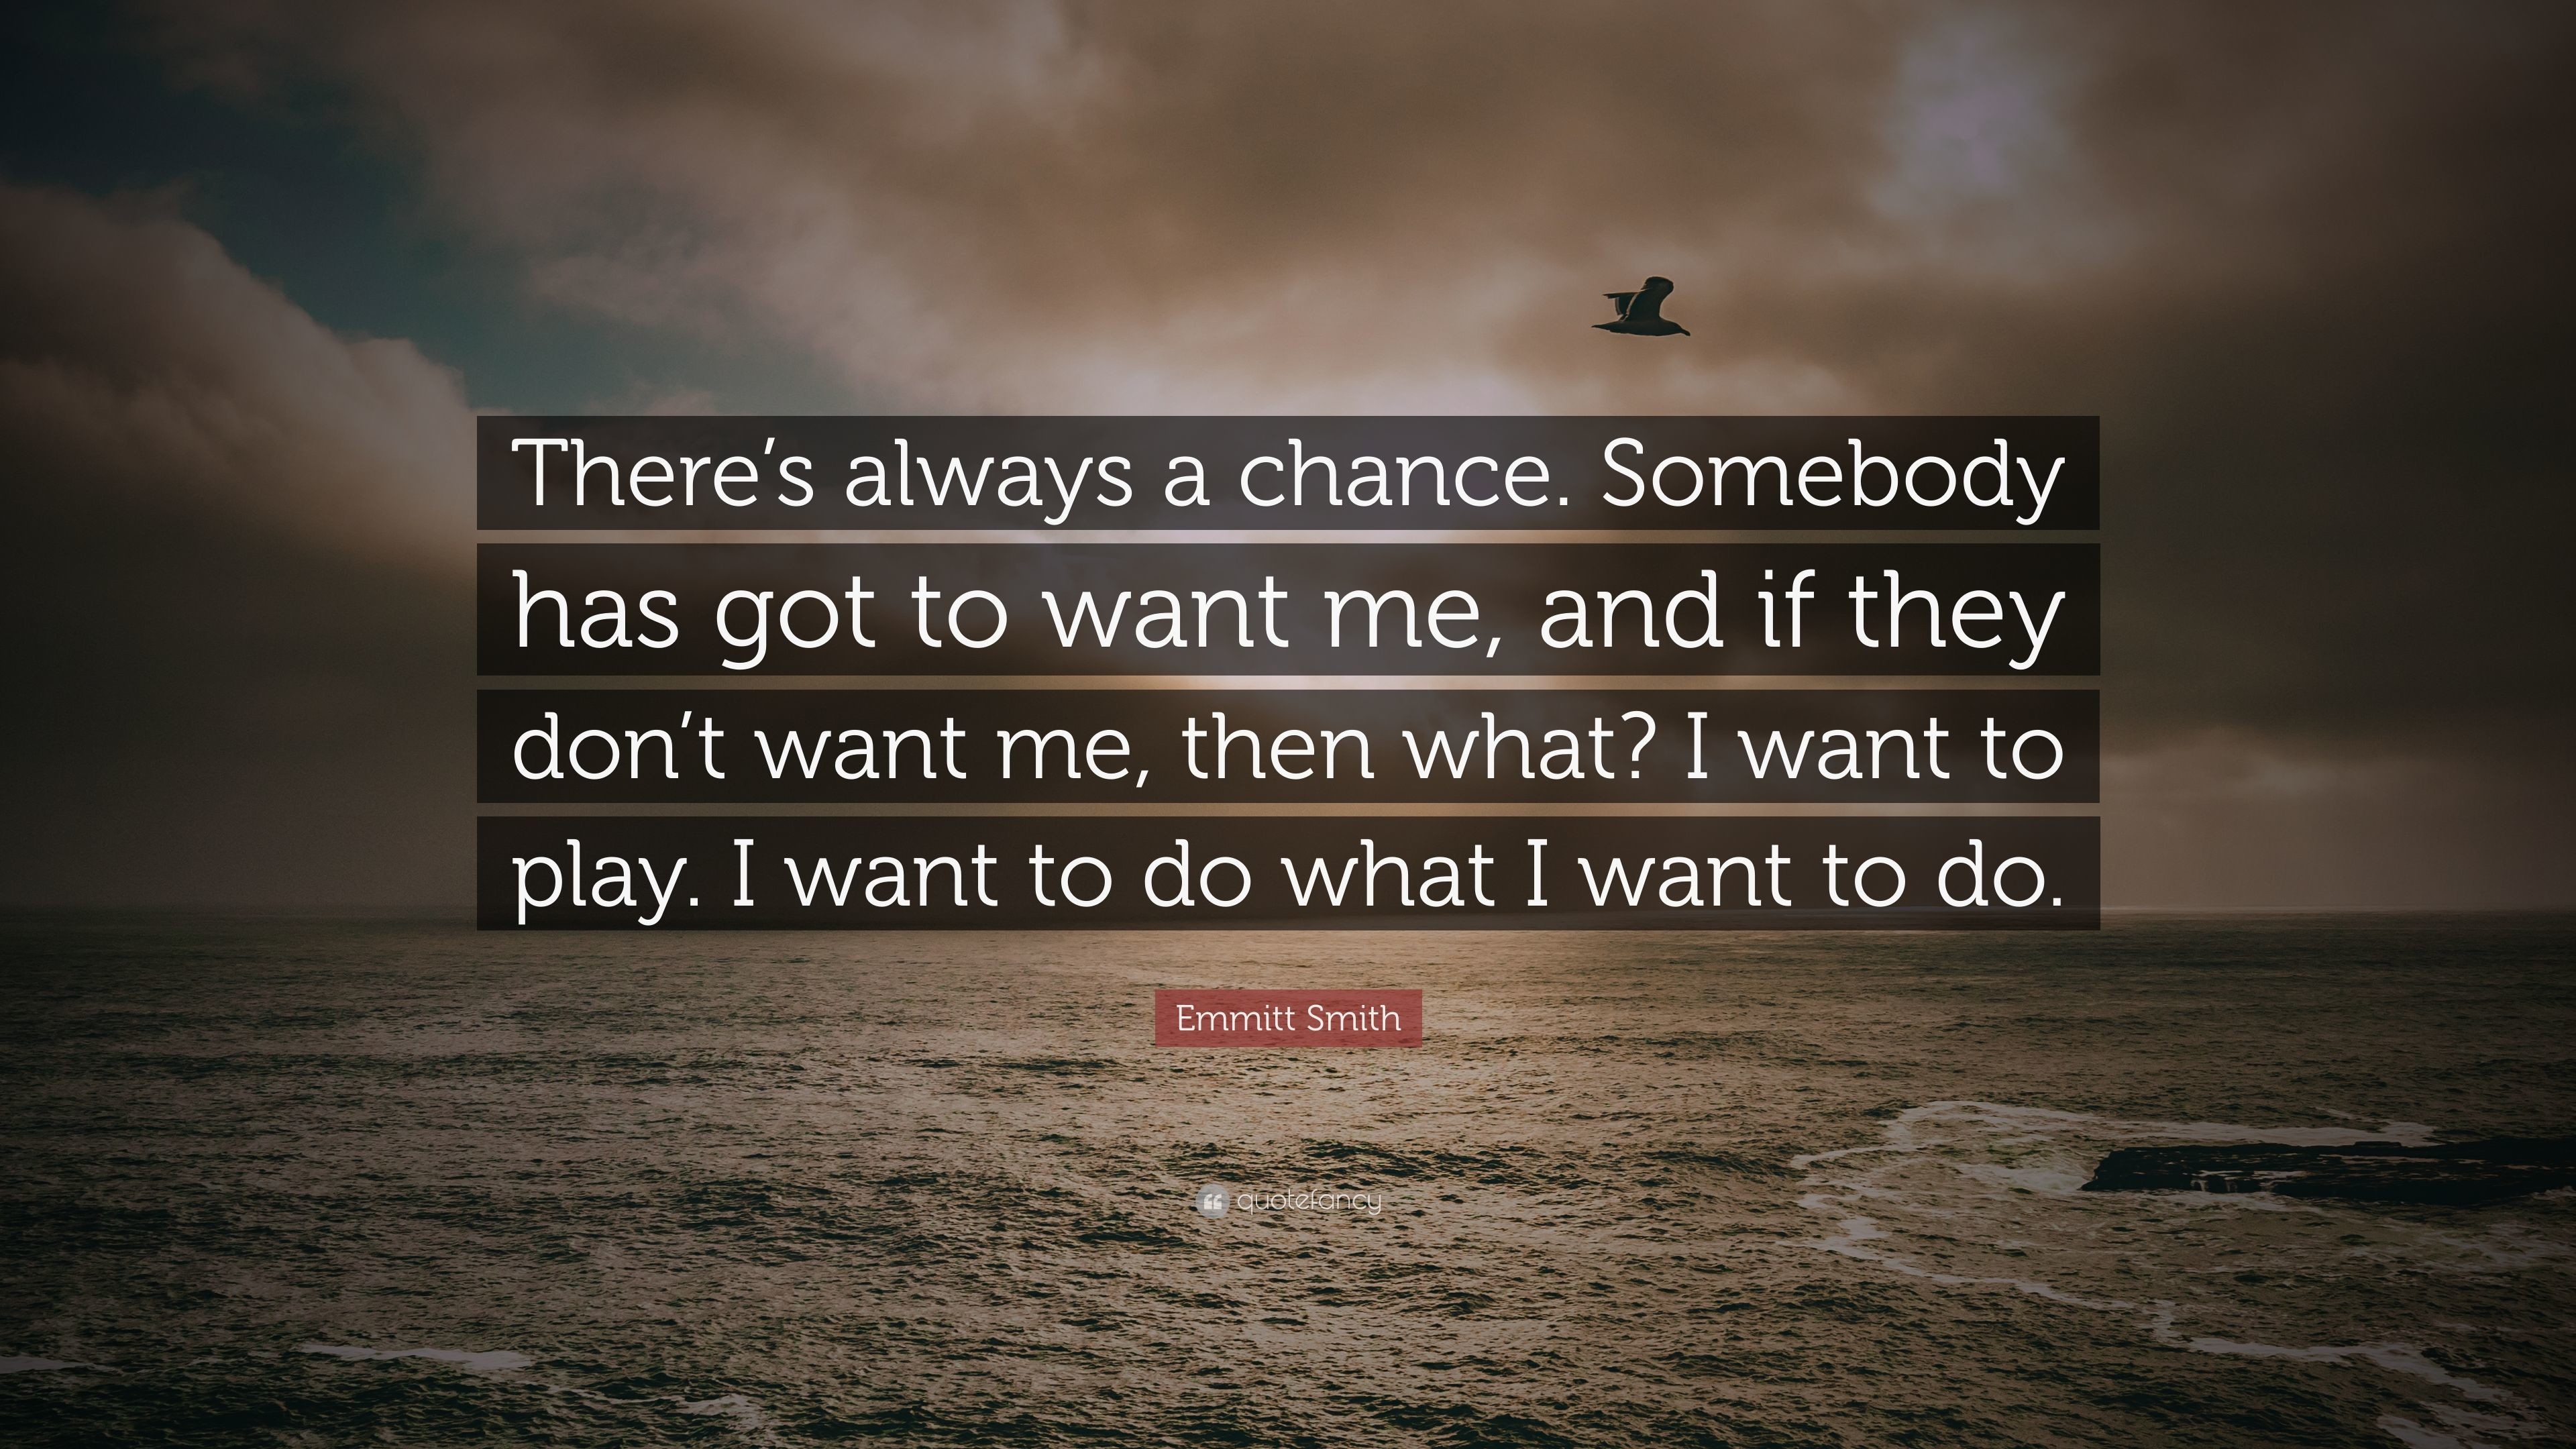 3840x2160 Emmitt Smith Quote: “There's always a chance. Somebody has got to want me